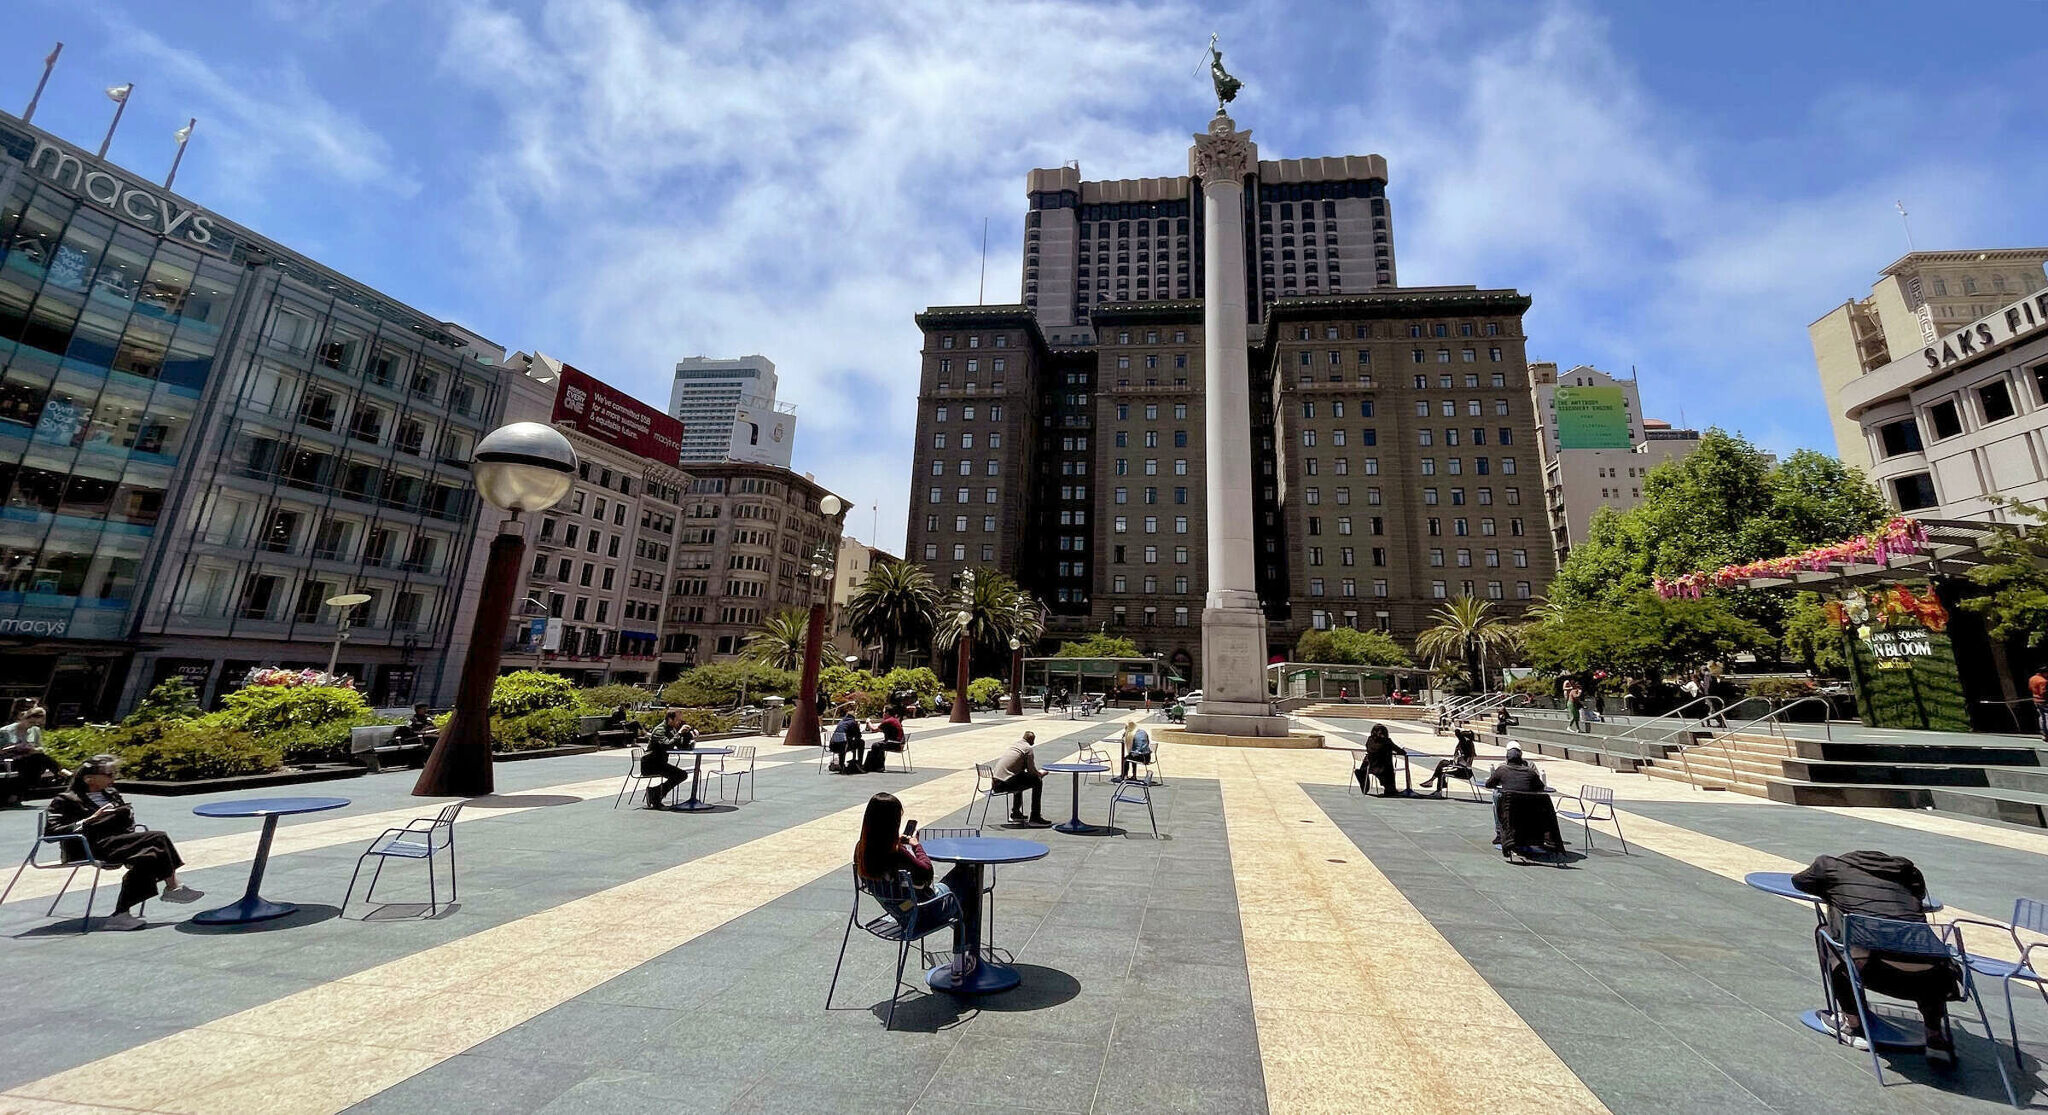 Should San Francisco Union Square turn into a residential